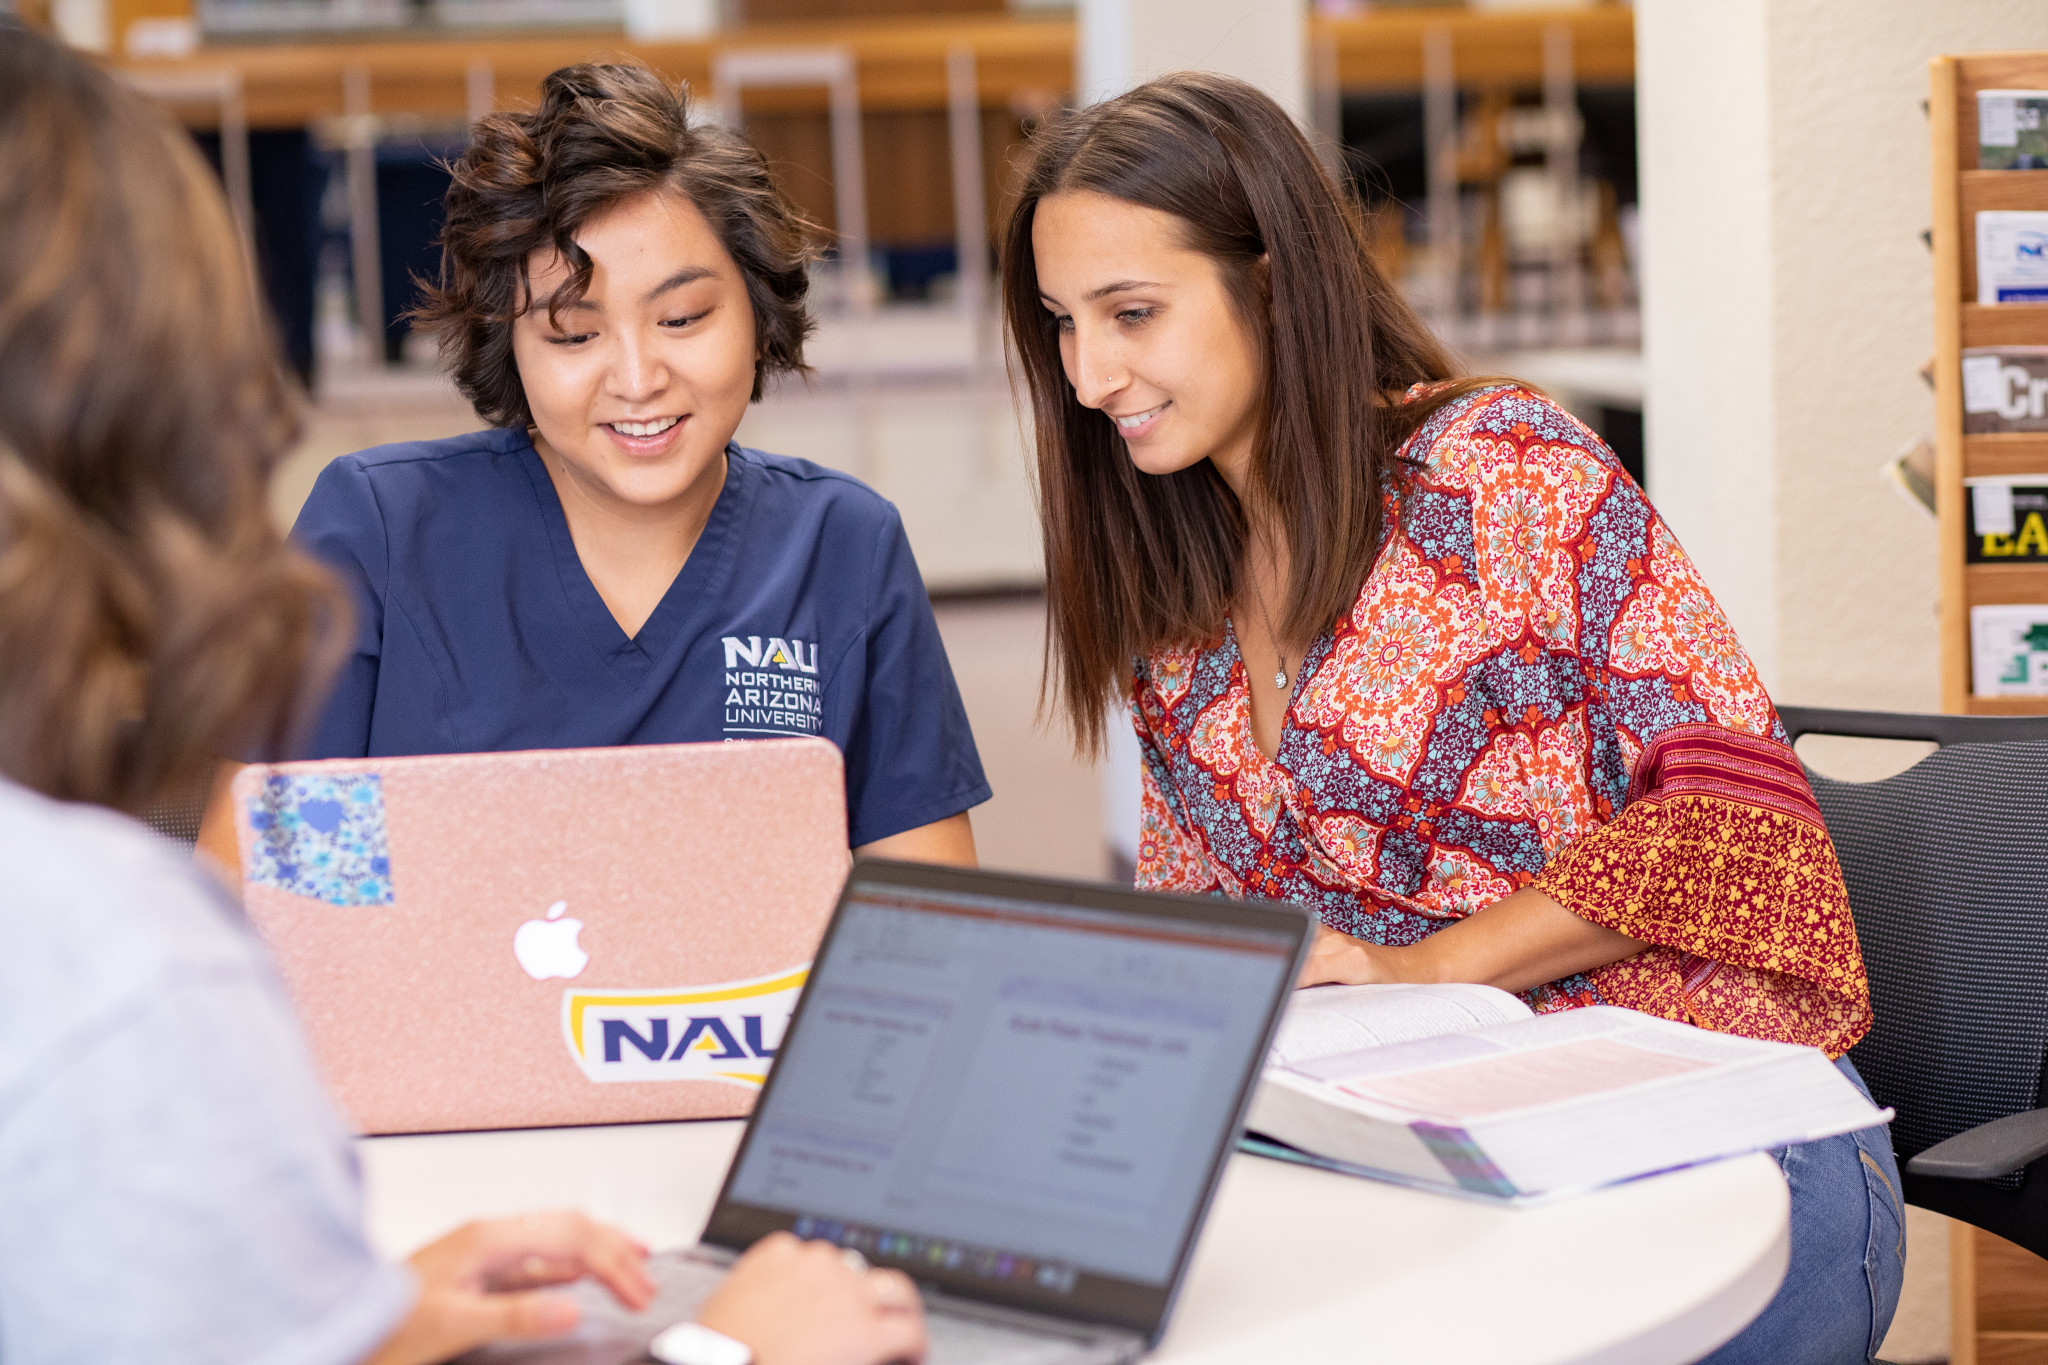 NAU students working together at the library